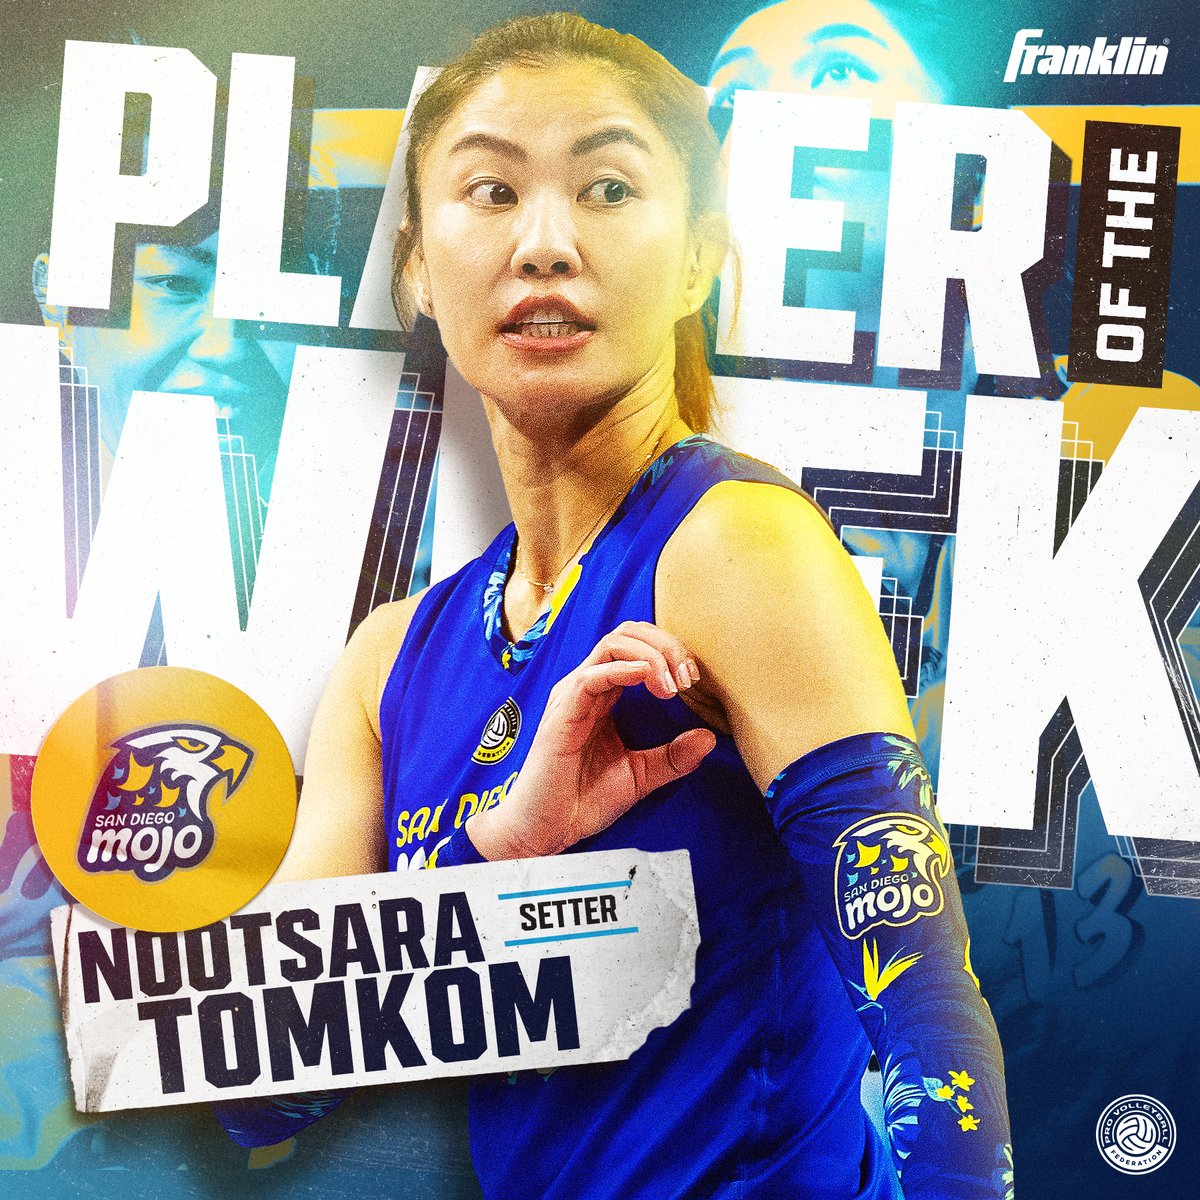 122 assists over three matches, averaging 9.4 assists across the 13 sets. Nootsara was DEALING! She is Week 12's Franklin Sports Player of the Week. #POTW #RealProVolleyball #ProVolleyball